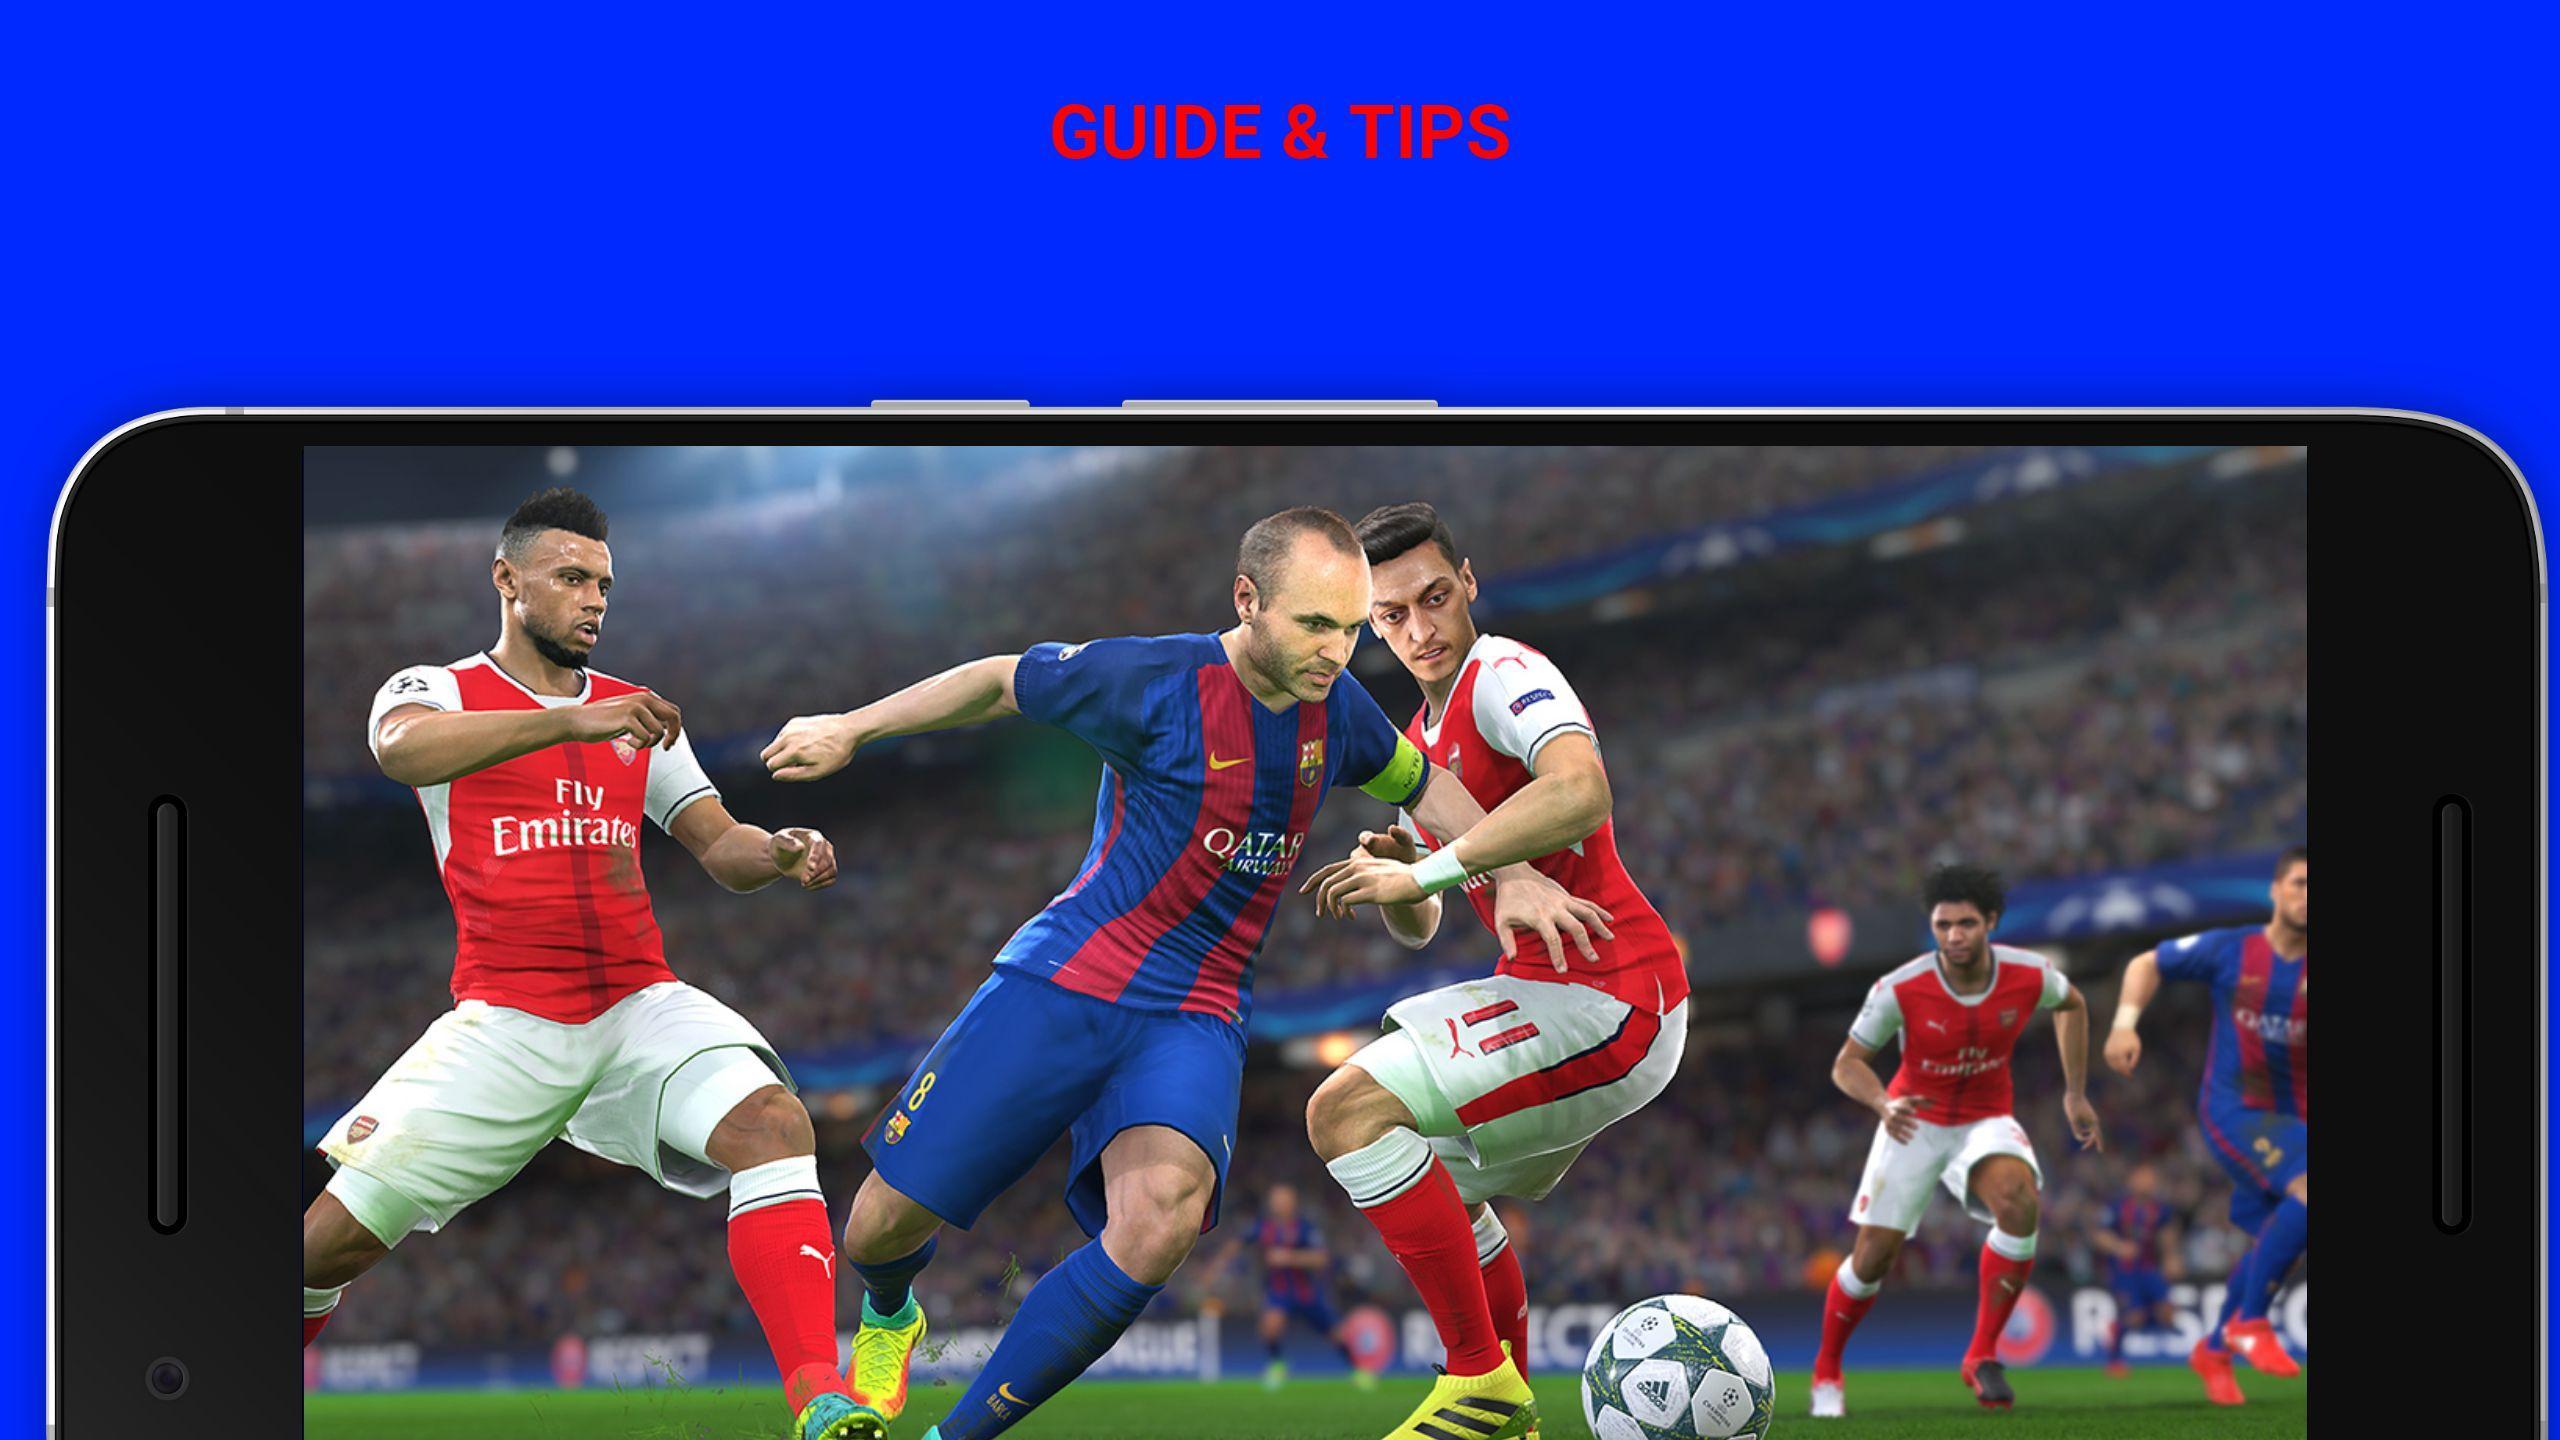 Guide For Winning Eleven 17 For Android Apk Download